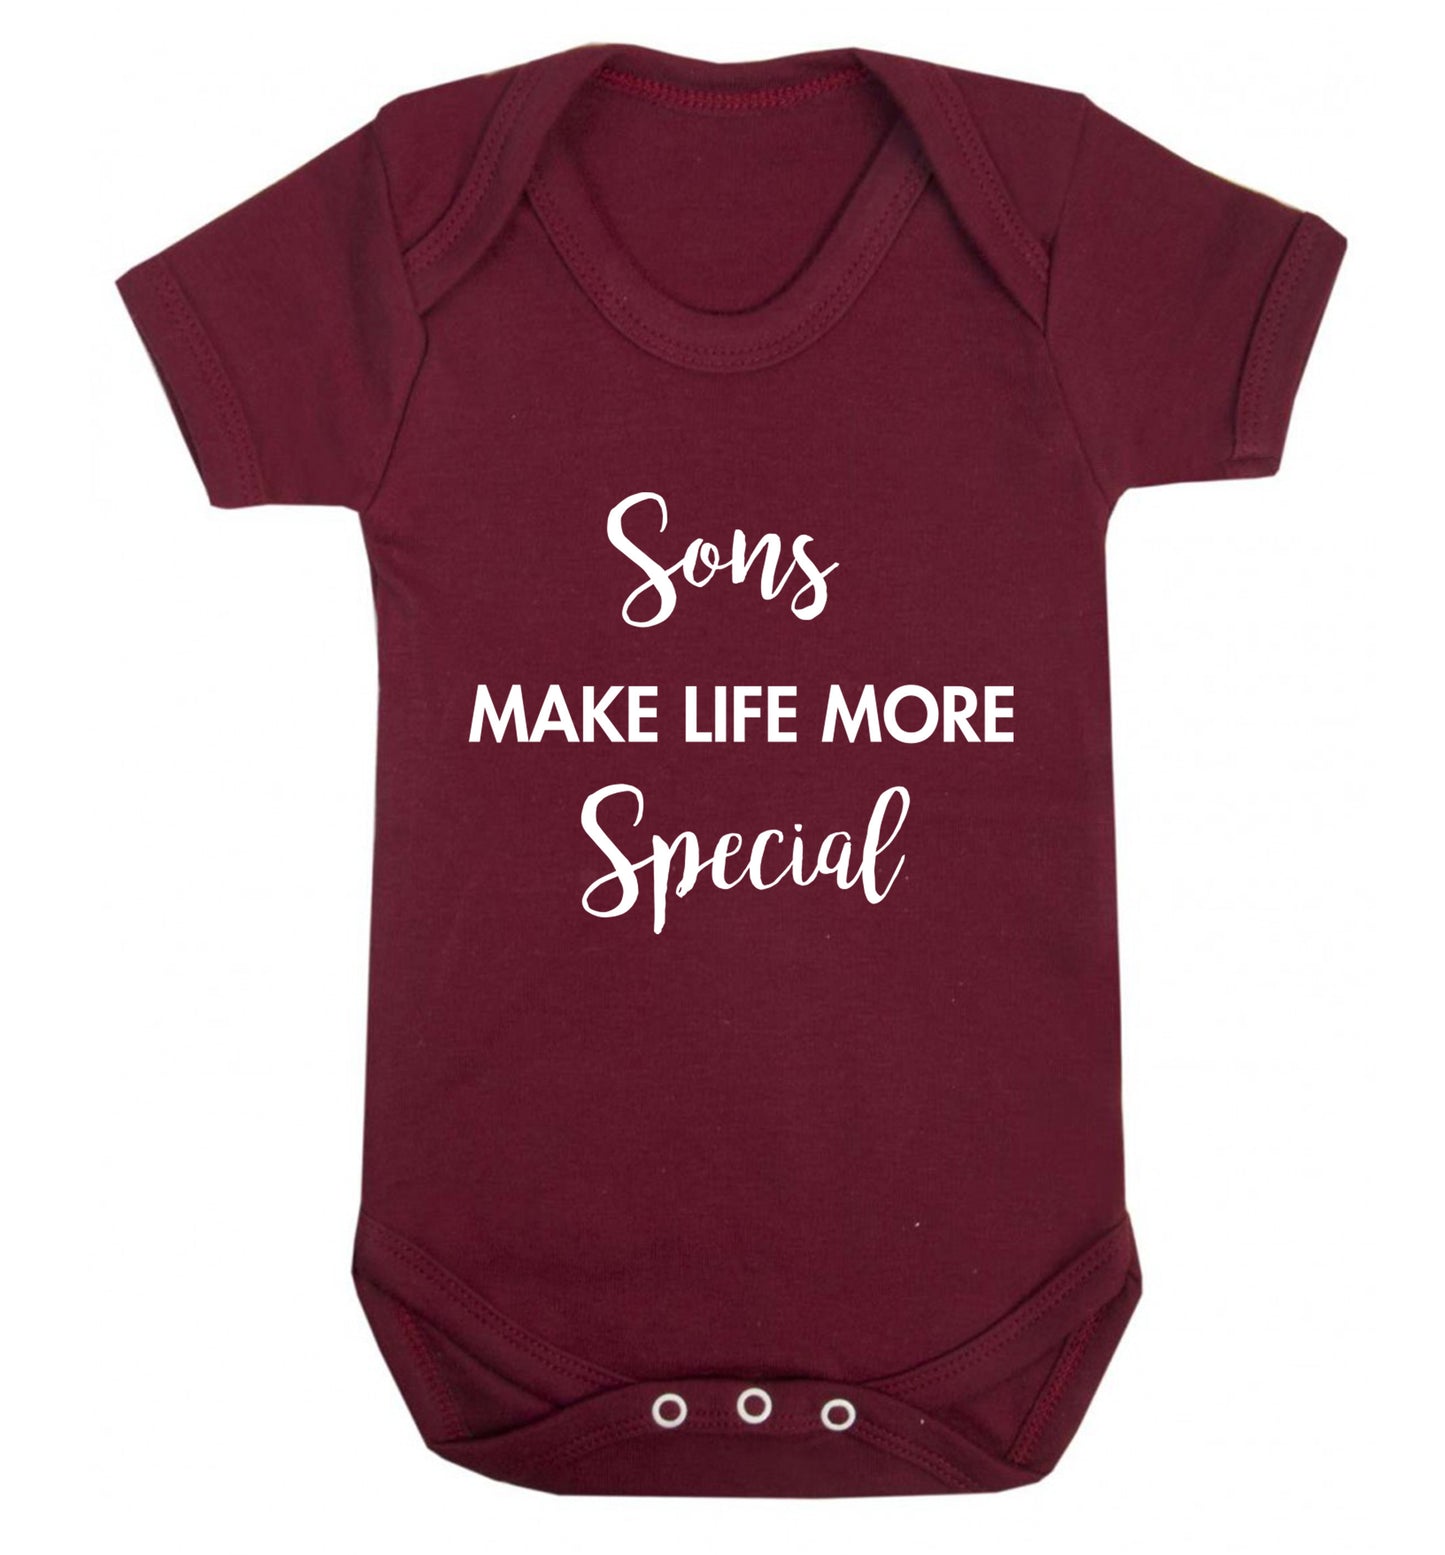 Daughters make life more special Baby Vest maroon 18-24 months